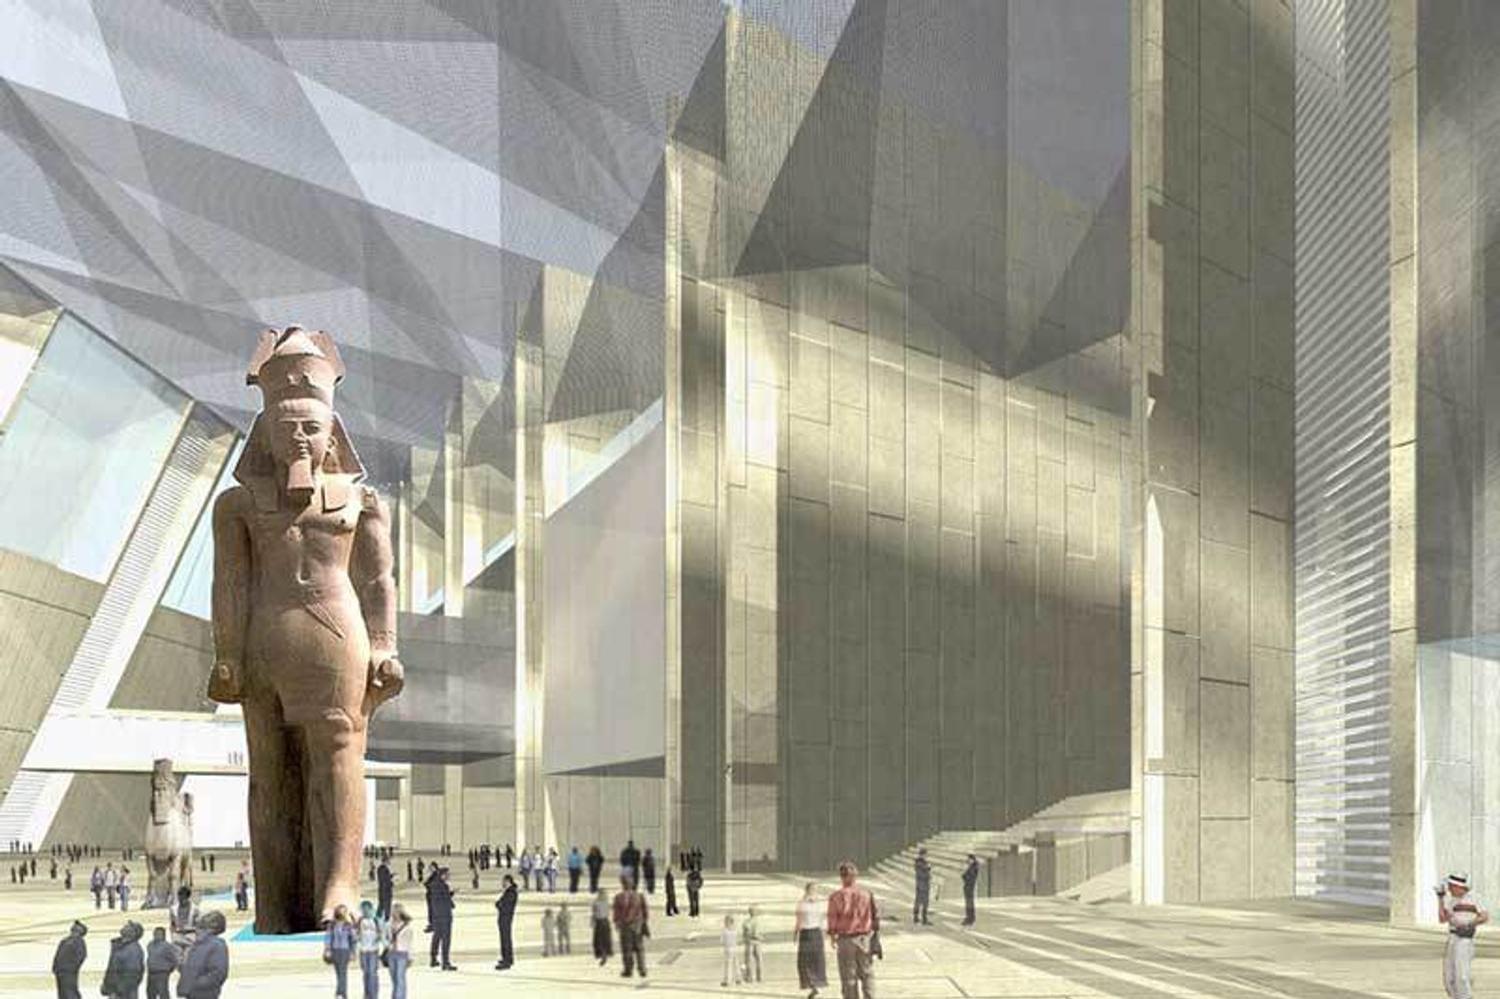 The Museum is expected to draw five million visitors per year